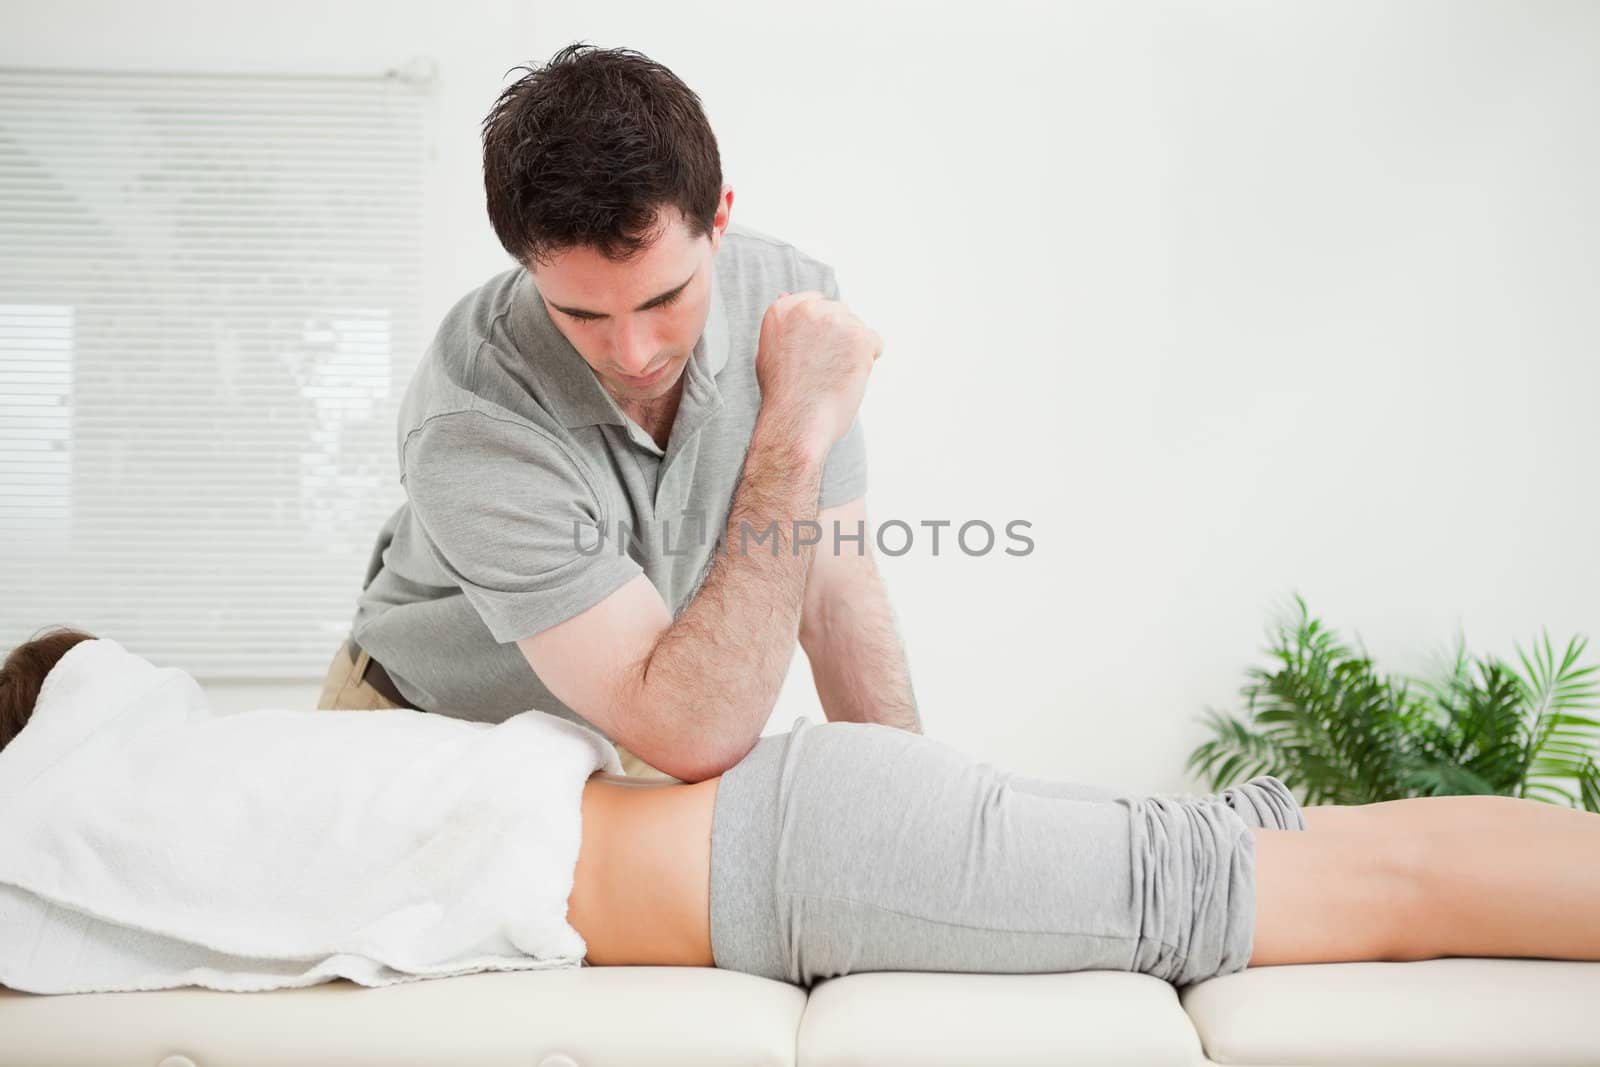 Man pressing the back of a woman with his elbow in a room